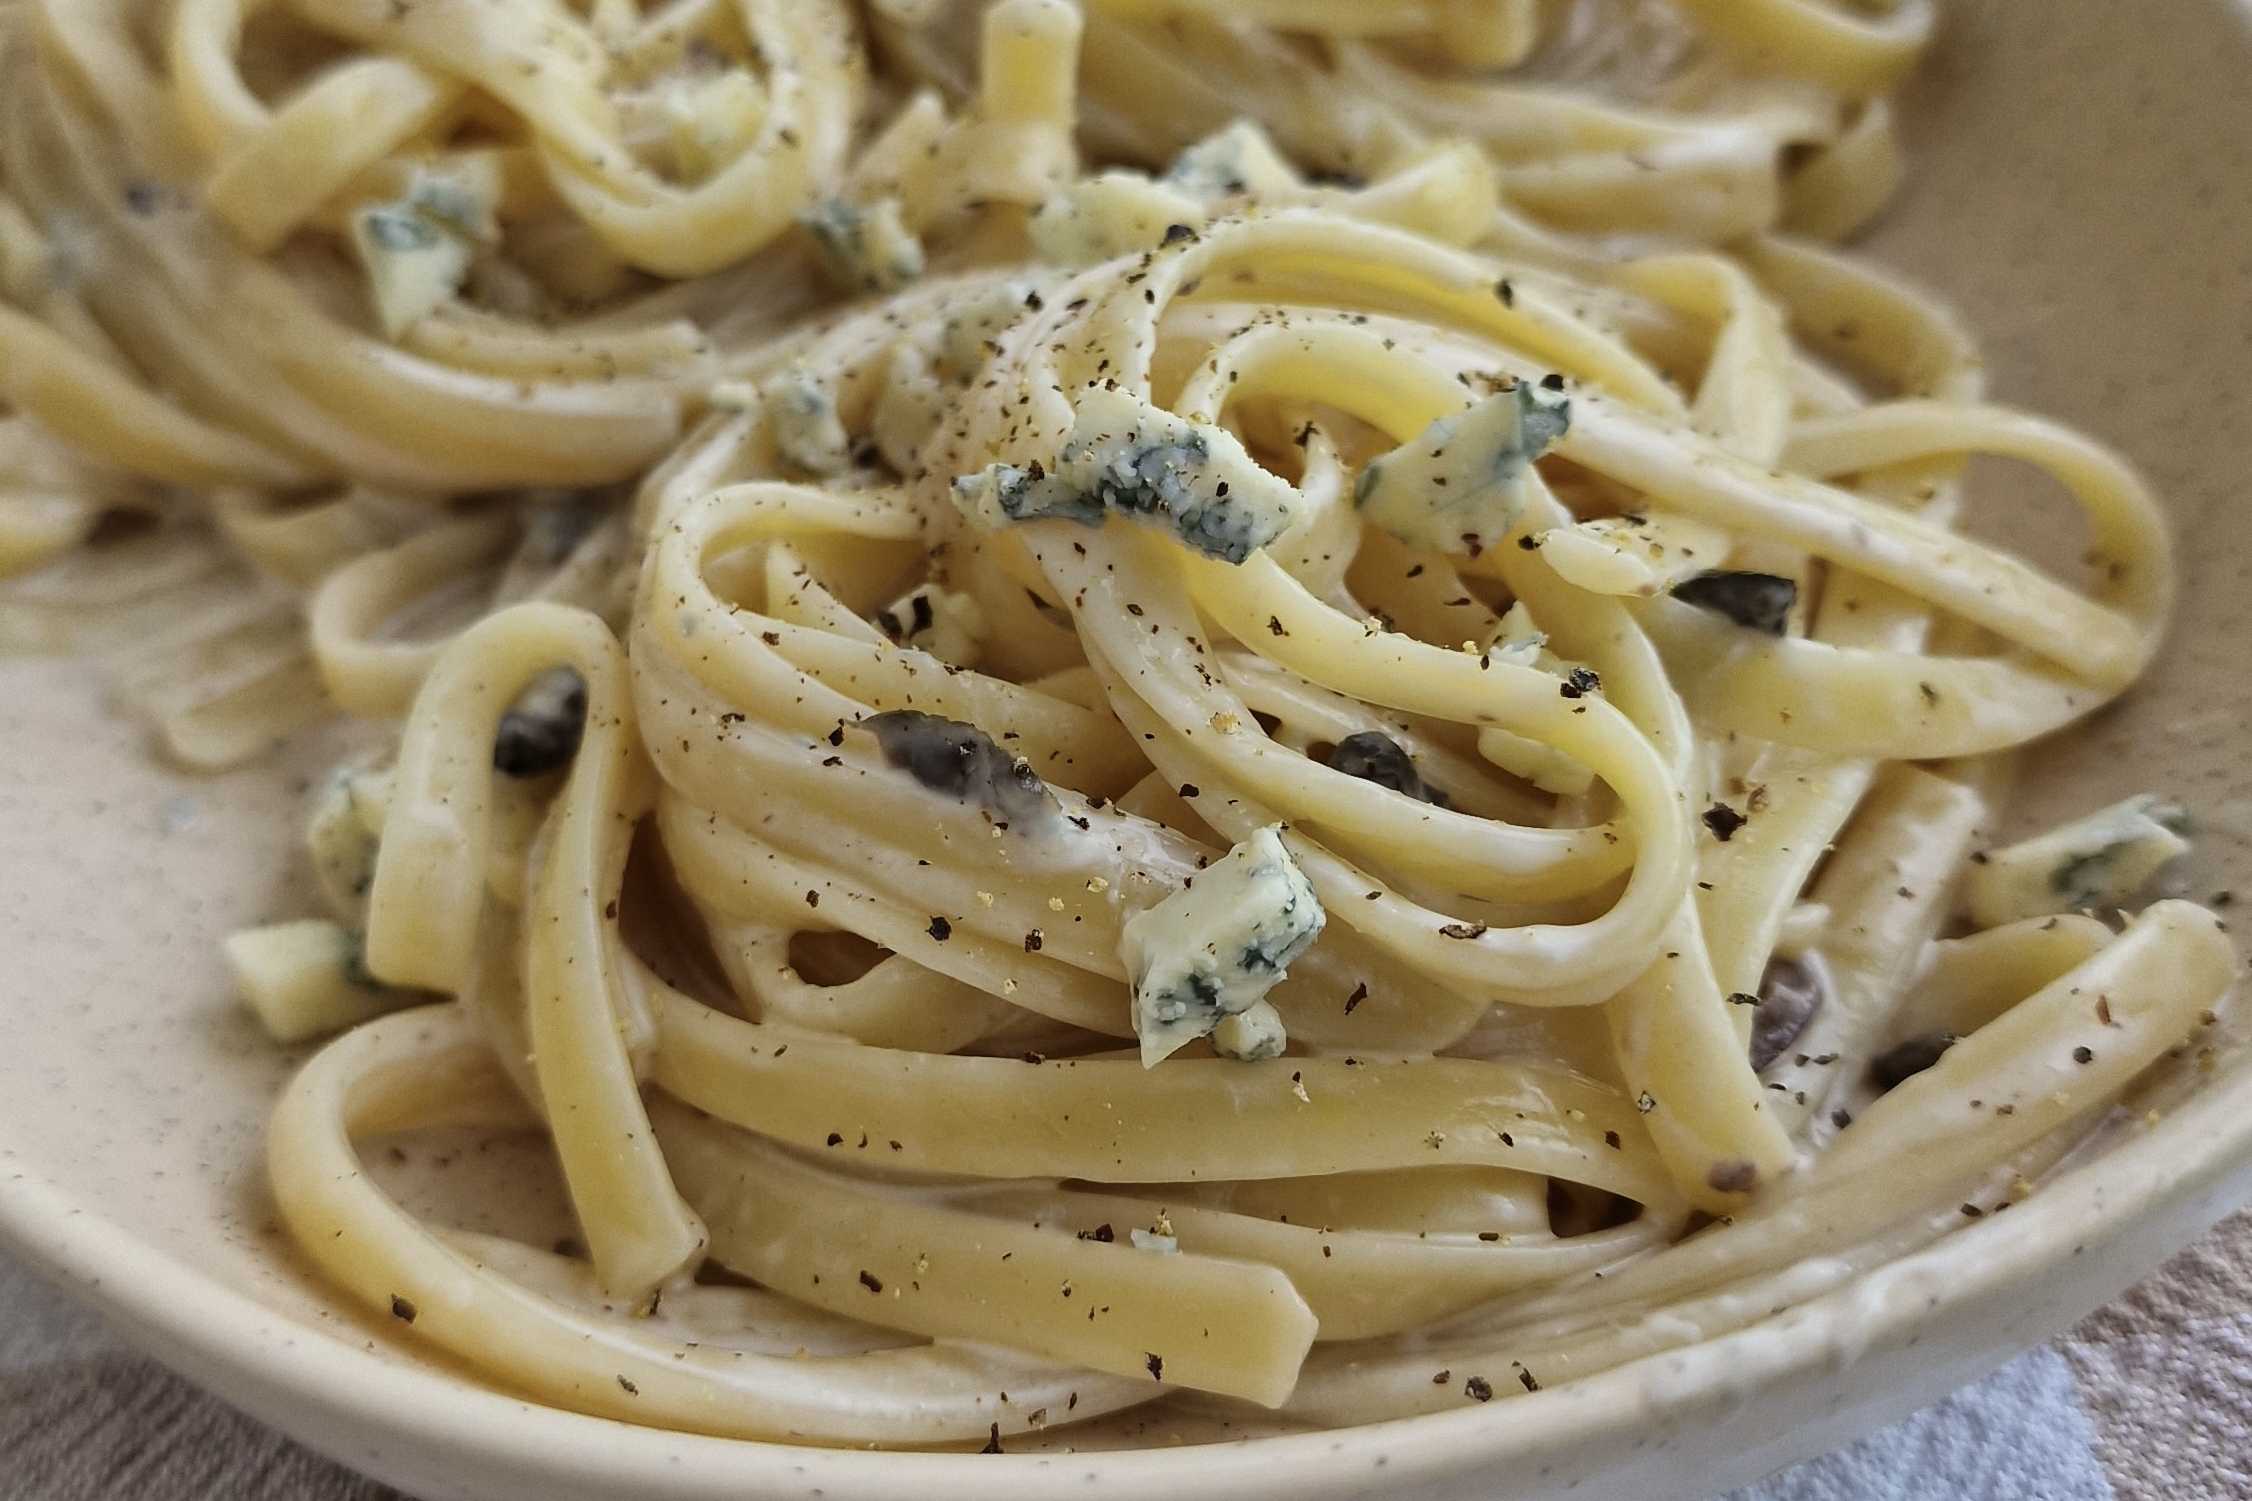 creamy pasta with blue cheese, black olives and black pepper